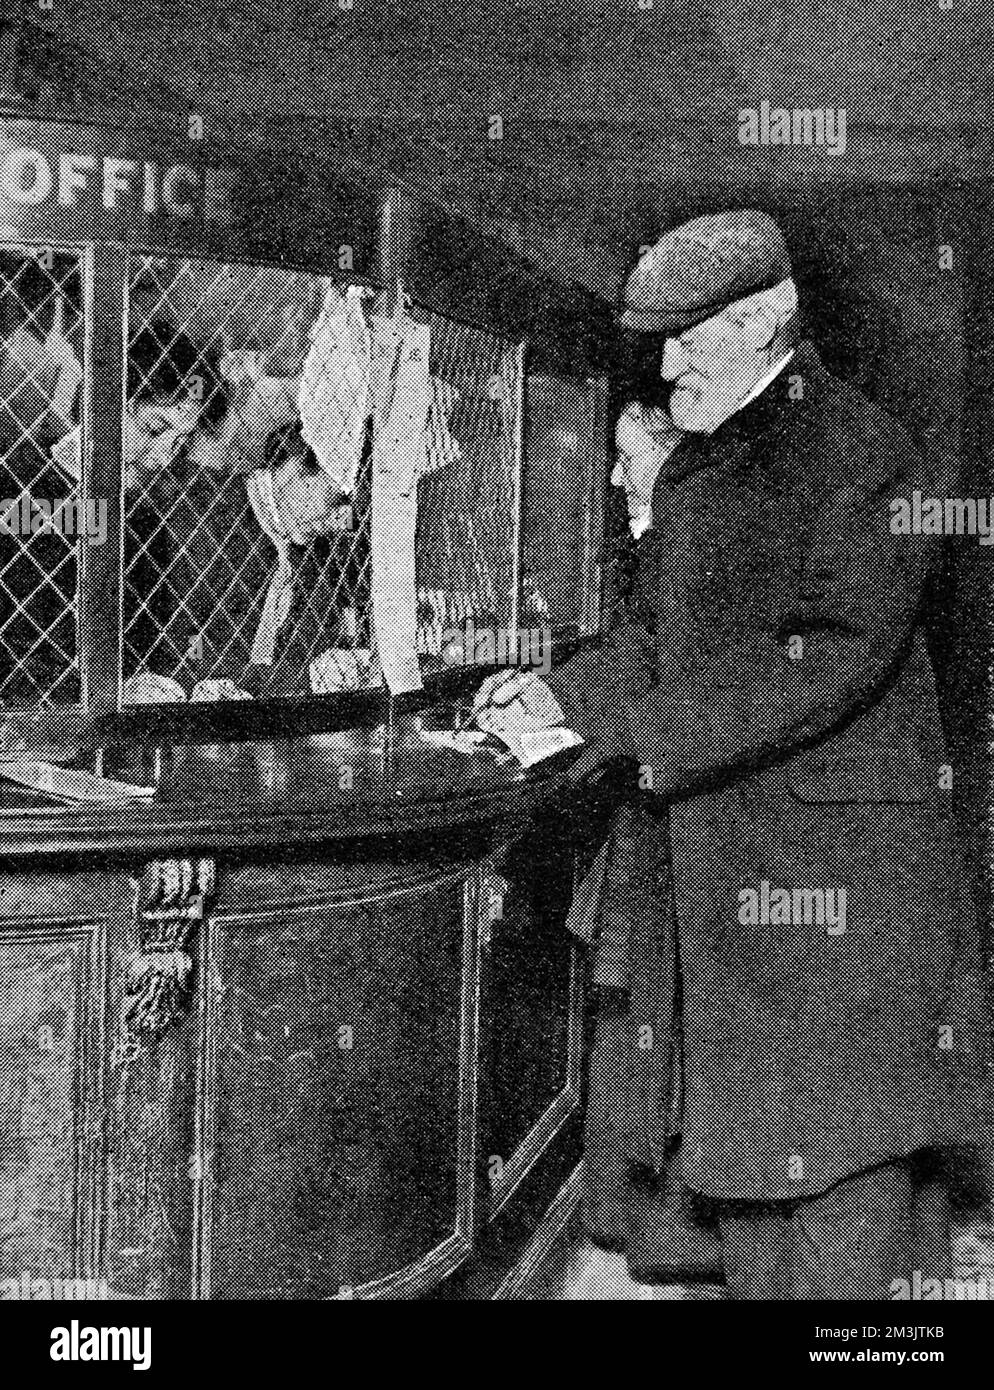 A typical scene on January 1st 1909 showing a man drawing his first pension at the post office. The Old Age Pension Act, introduced by David Lloyd George, allowed weekly payments to be made to all those who had qualified for the benefit.     Date: 1909 Stock Photo